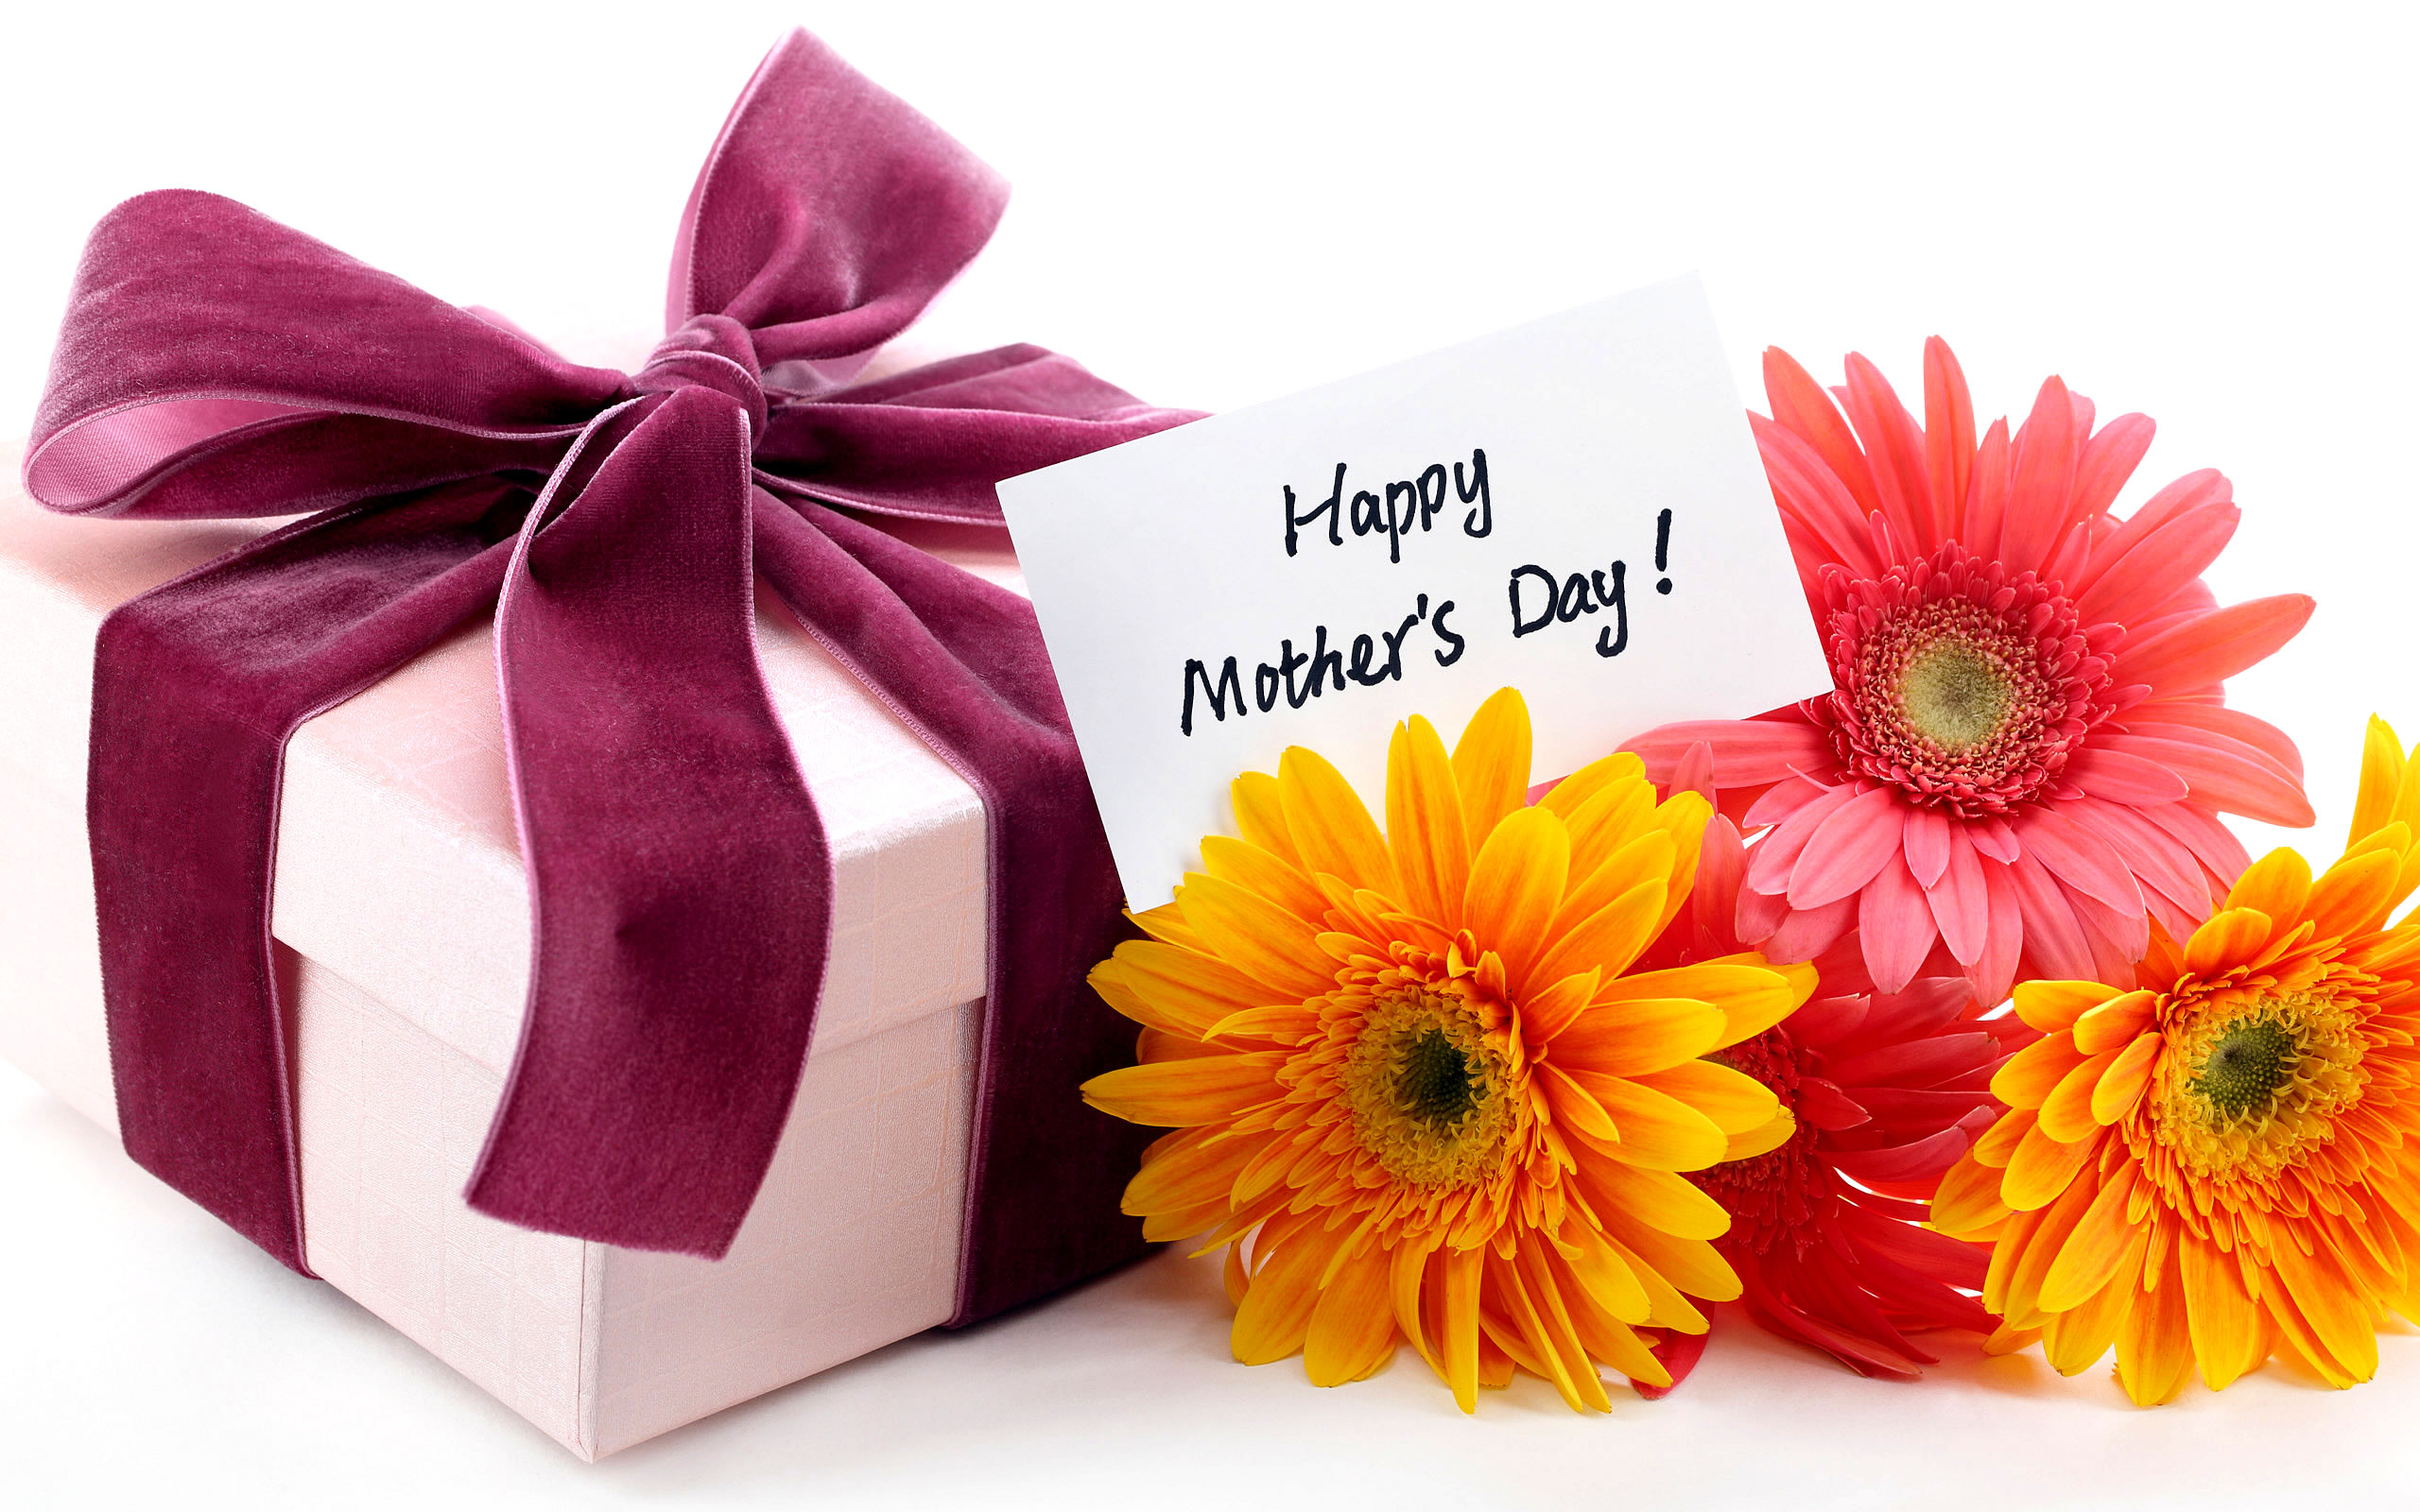 Happy Mothers Day Wishes Greetings Gift Cards Download